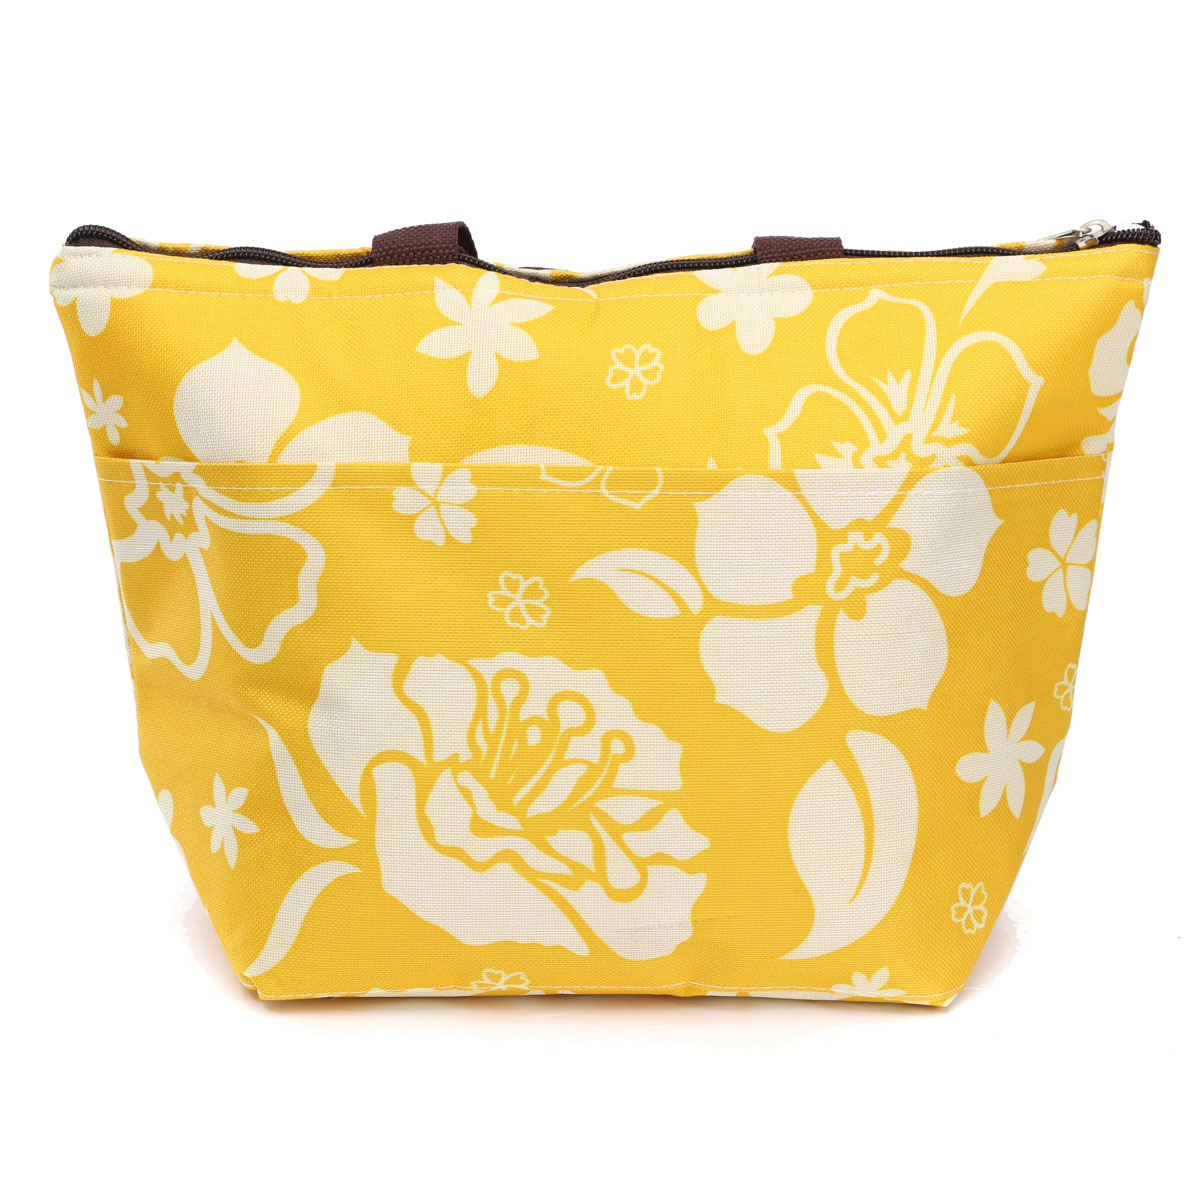 Waterproof Cooler; Lunch Picnic Bag; Insulated; Lunch Handbag (Color: Yellow)